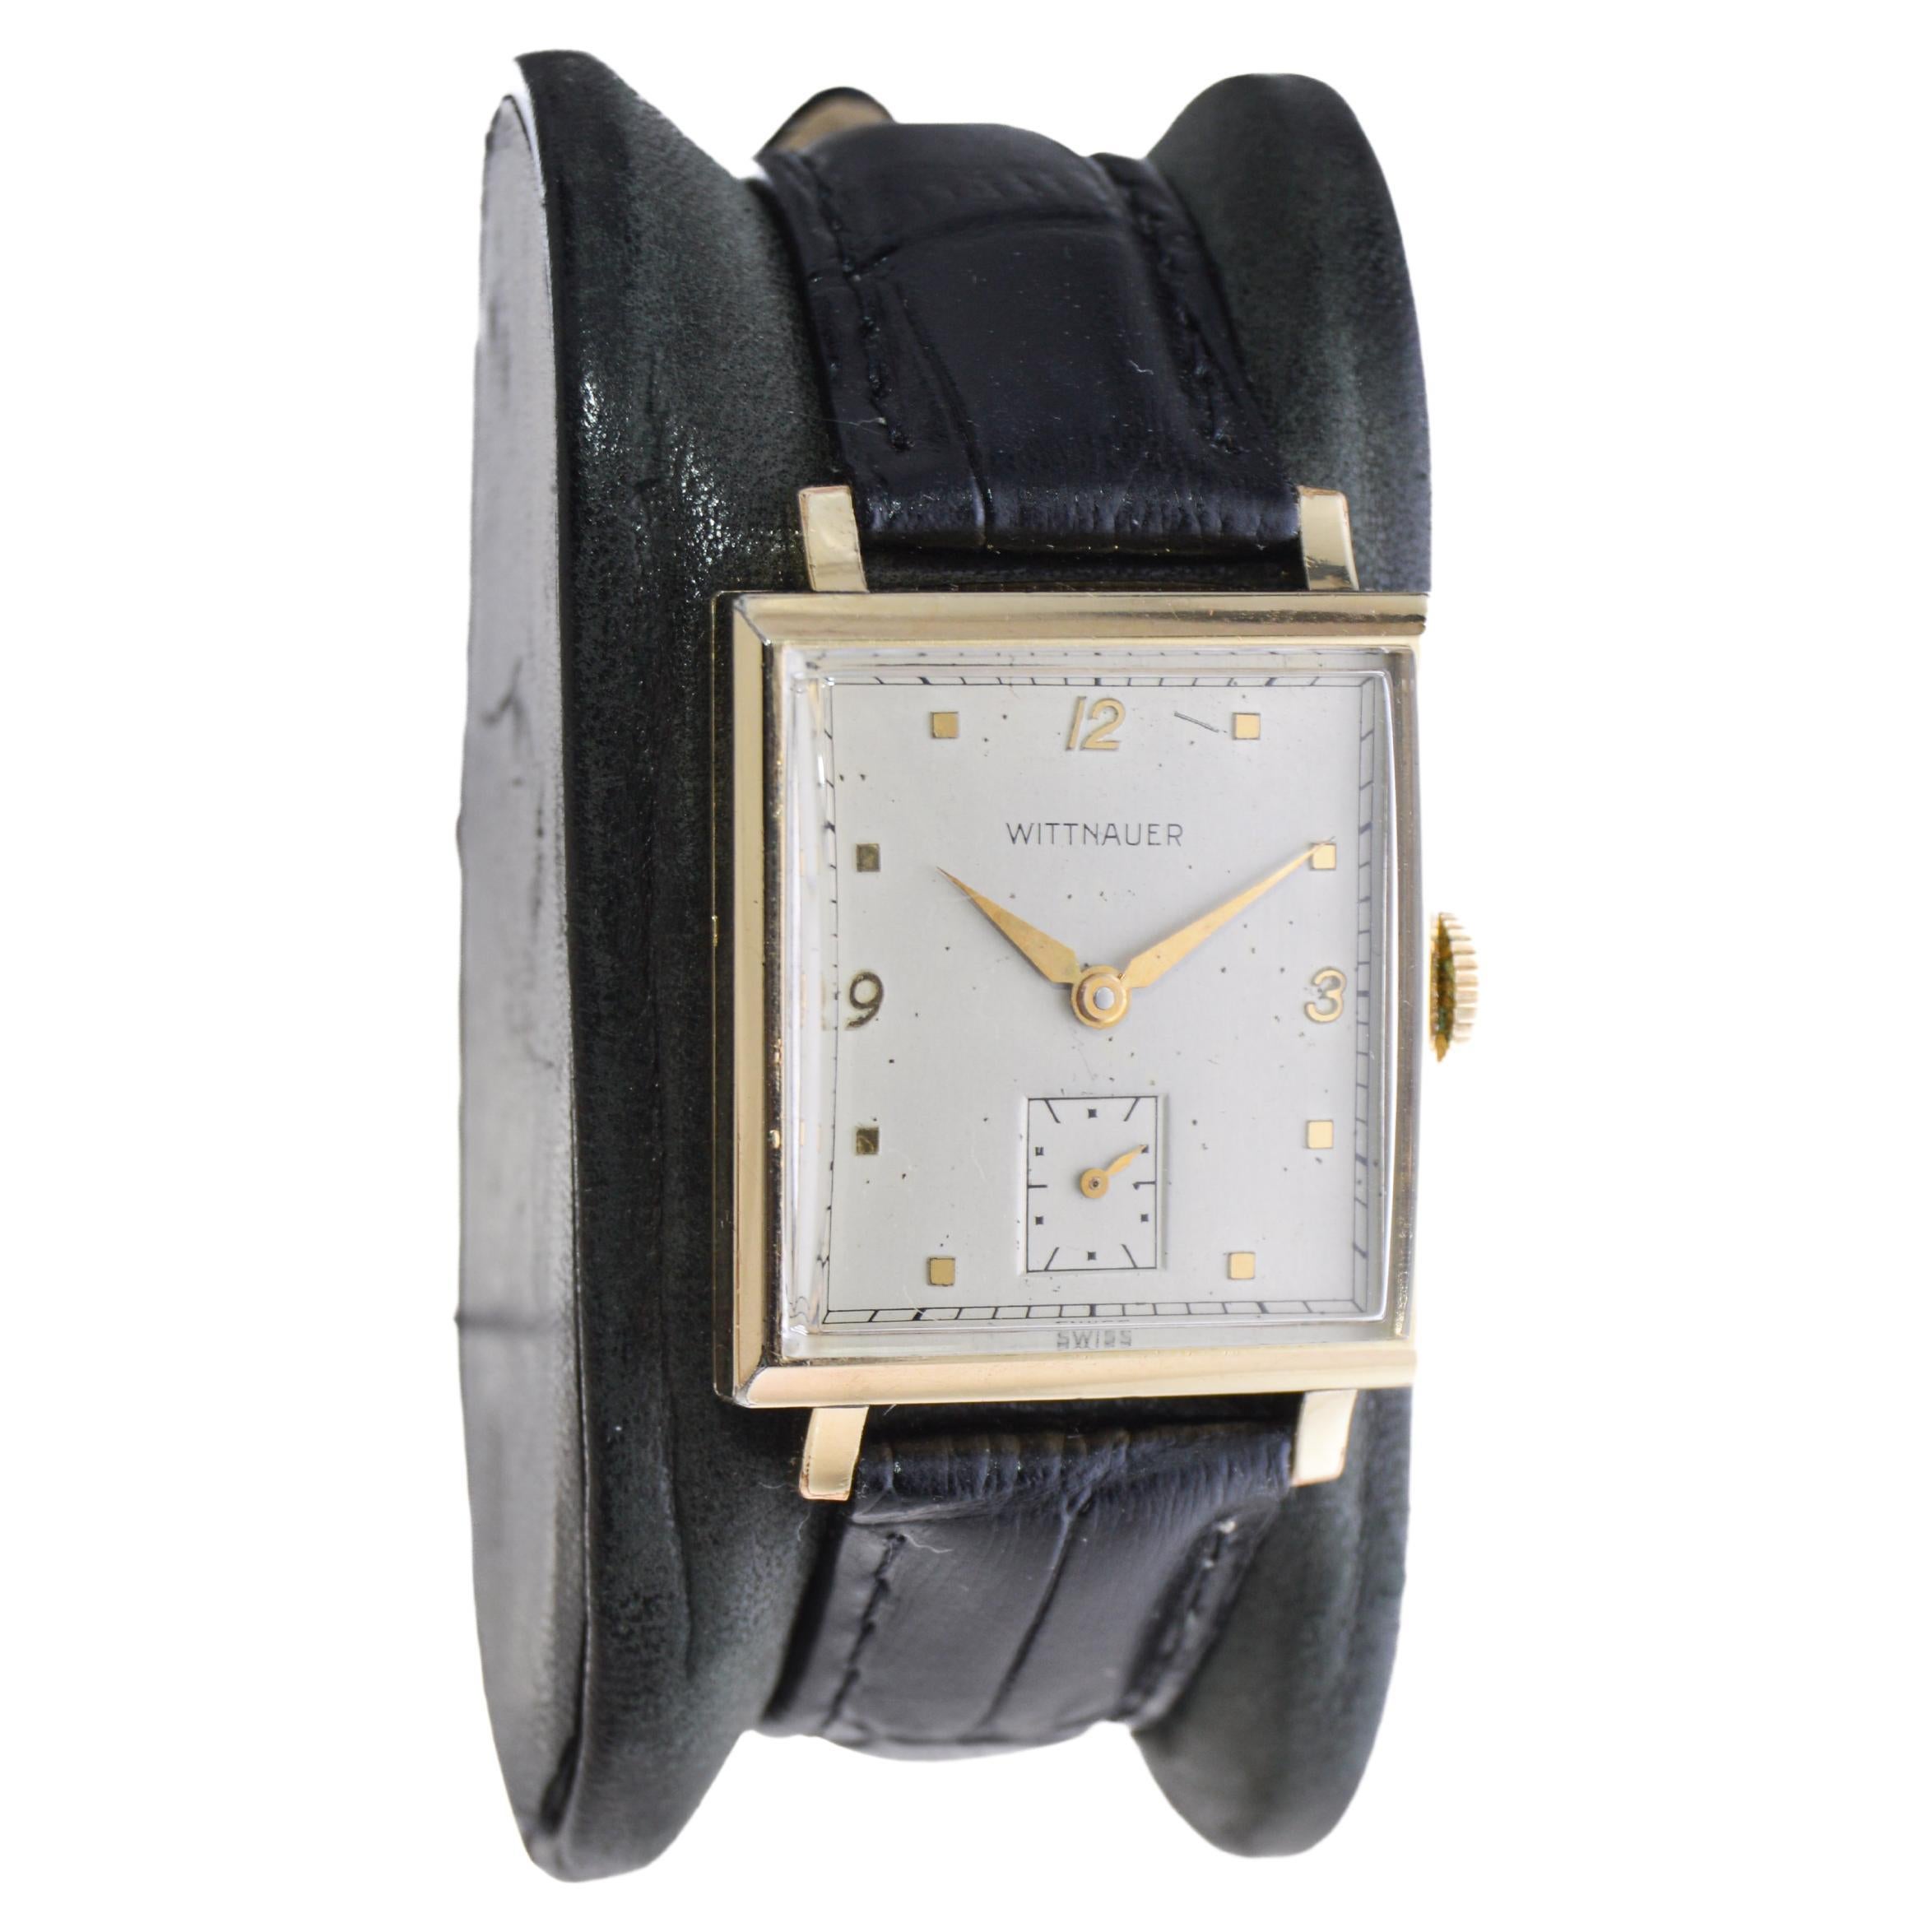 FACTORY / HOUSE: Wittnauer Watch Company
STYLE / REFERENCE: Art Deco
METAL / MATERIAL: Yellow Gold Filled
CIRCA / YEAR: 1940's
DIMENSIONS / SIZE: 36mm Length X 26mm Width
MOVEMENT / CALIBER: Manual Winding / 15 Jewels 
DIAL / HANDS: Silvered with